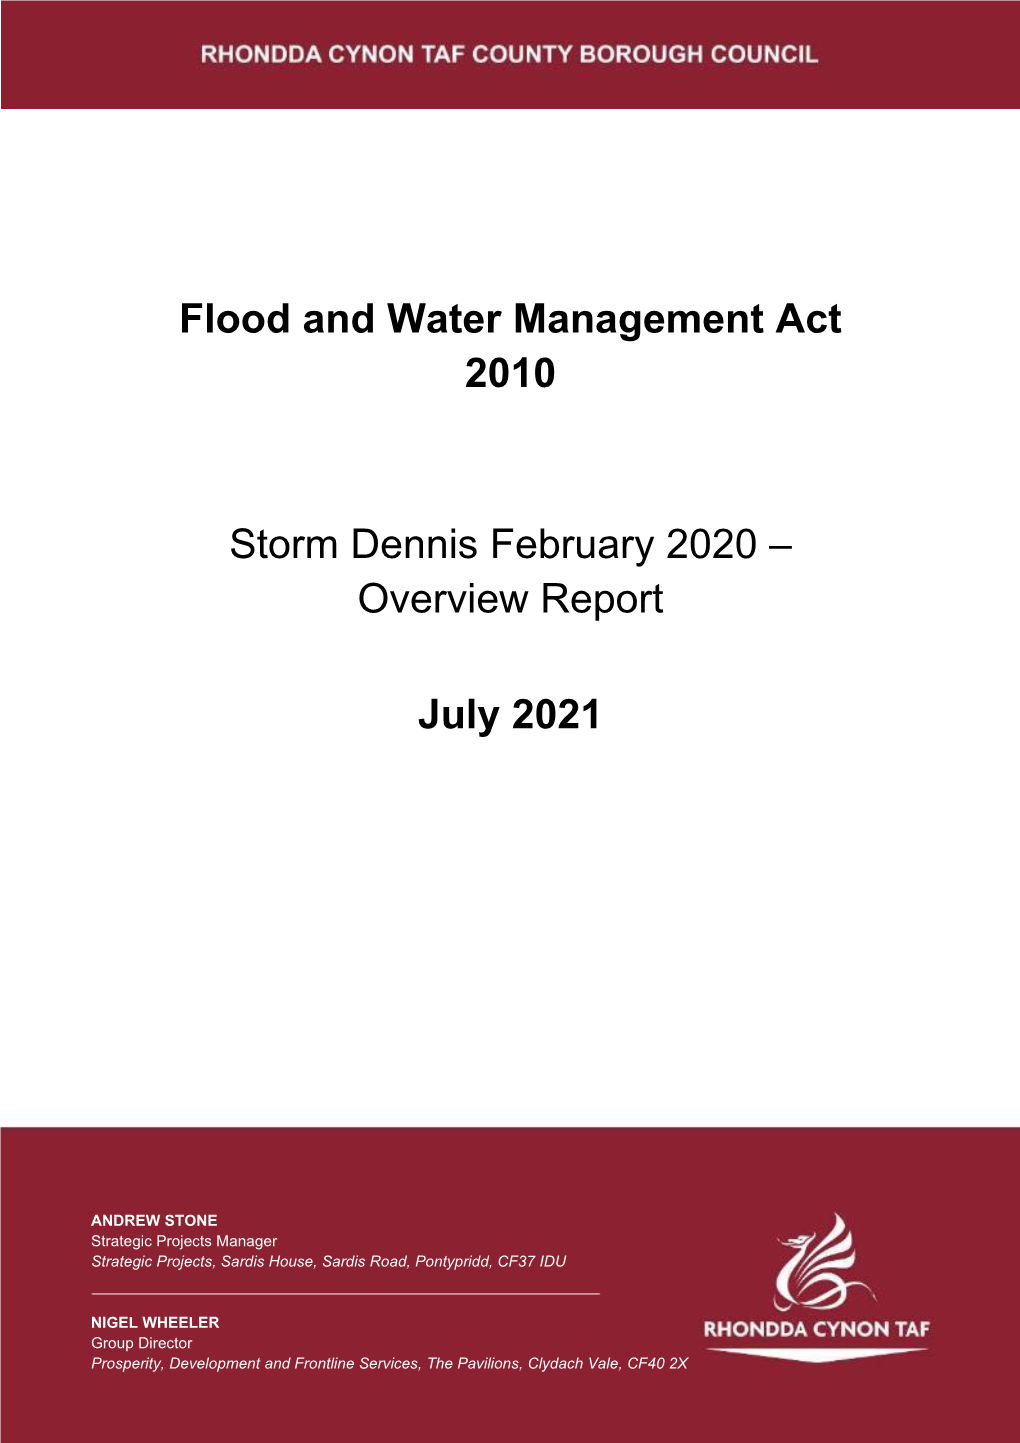 Flood and Water Management Act 2010 Storm Dennis February 2020 – Overview Report July 2021